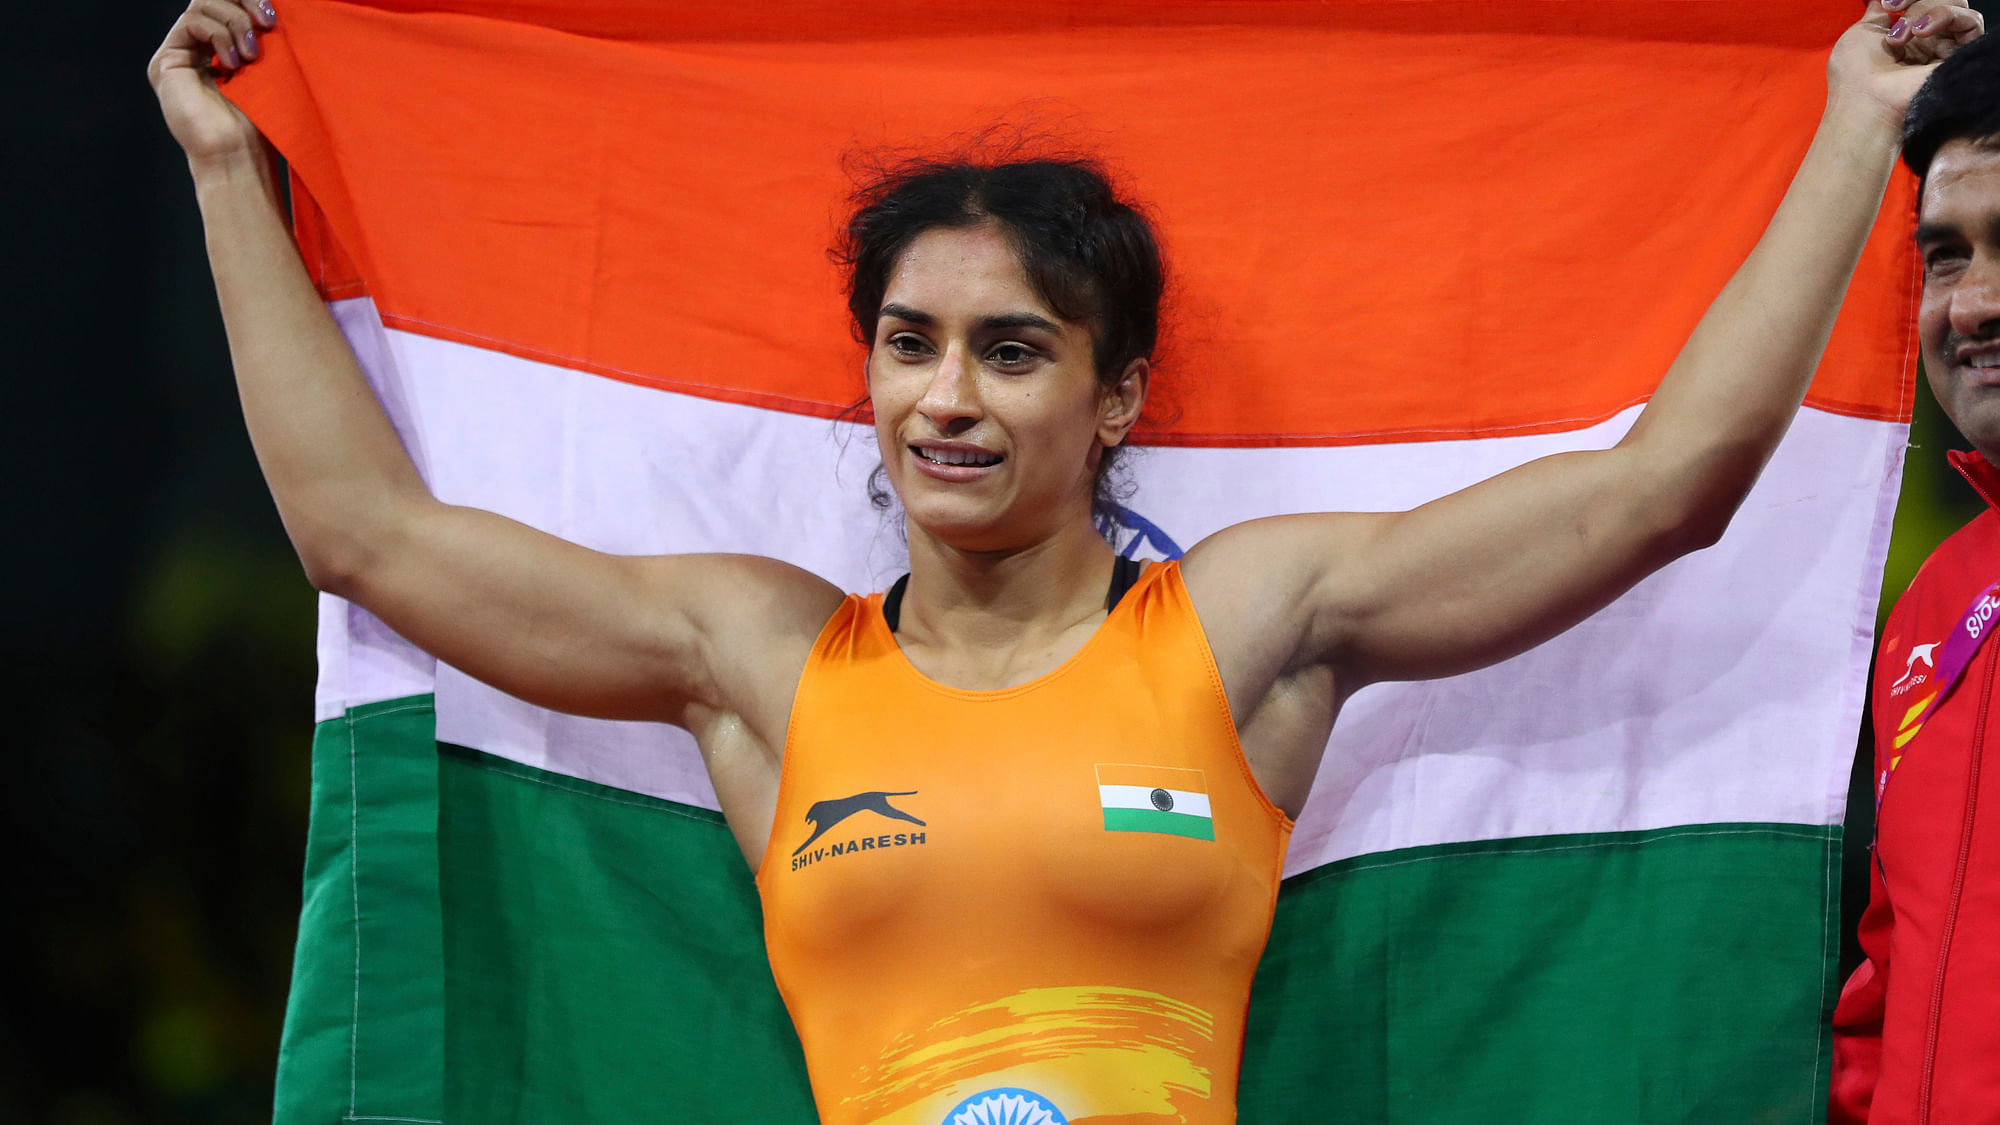 Vinesh Phogat won a gold medal in both the Asian and the Commonwealth Games in 2018.